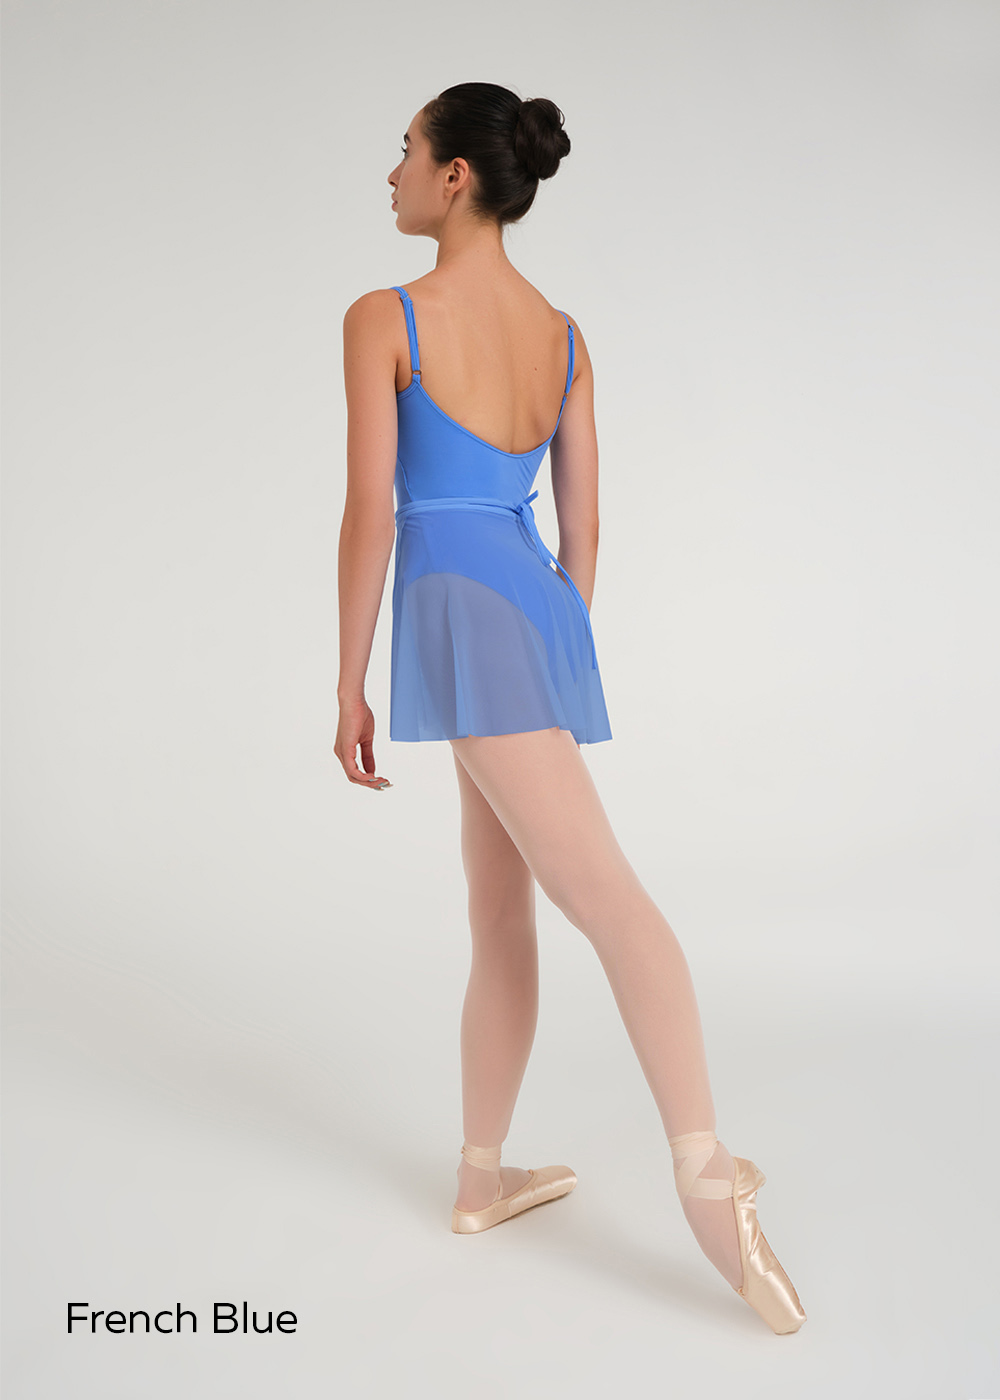 EDEN, Mesh skirt with ties (DA2006N) | Nikolay® - official online shop of  pointe shoes and dance apparel in the USA